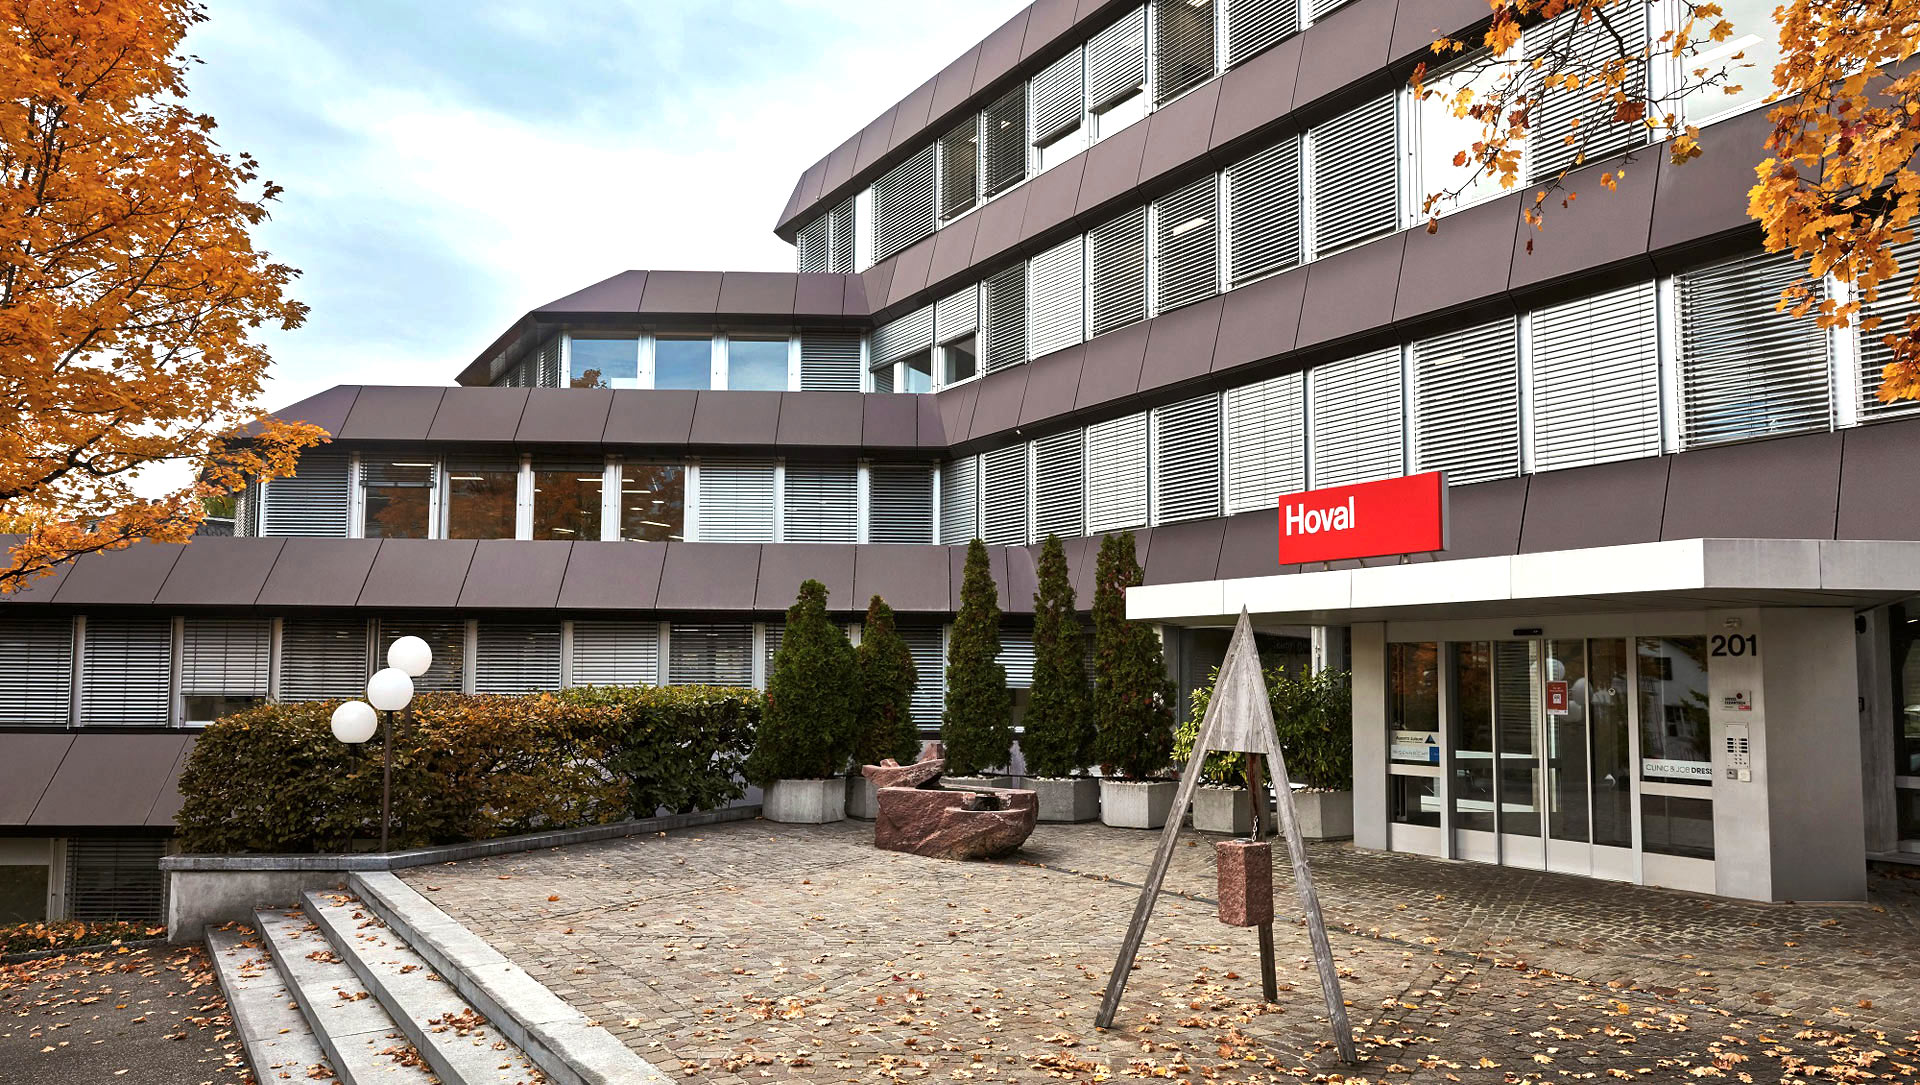 Hoval, headquartered in Feldmeilen, Switzerland, is one of the leading international companies for indoor climate solutions and a specialist in heating and air-conditioning technology.